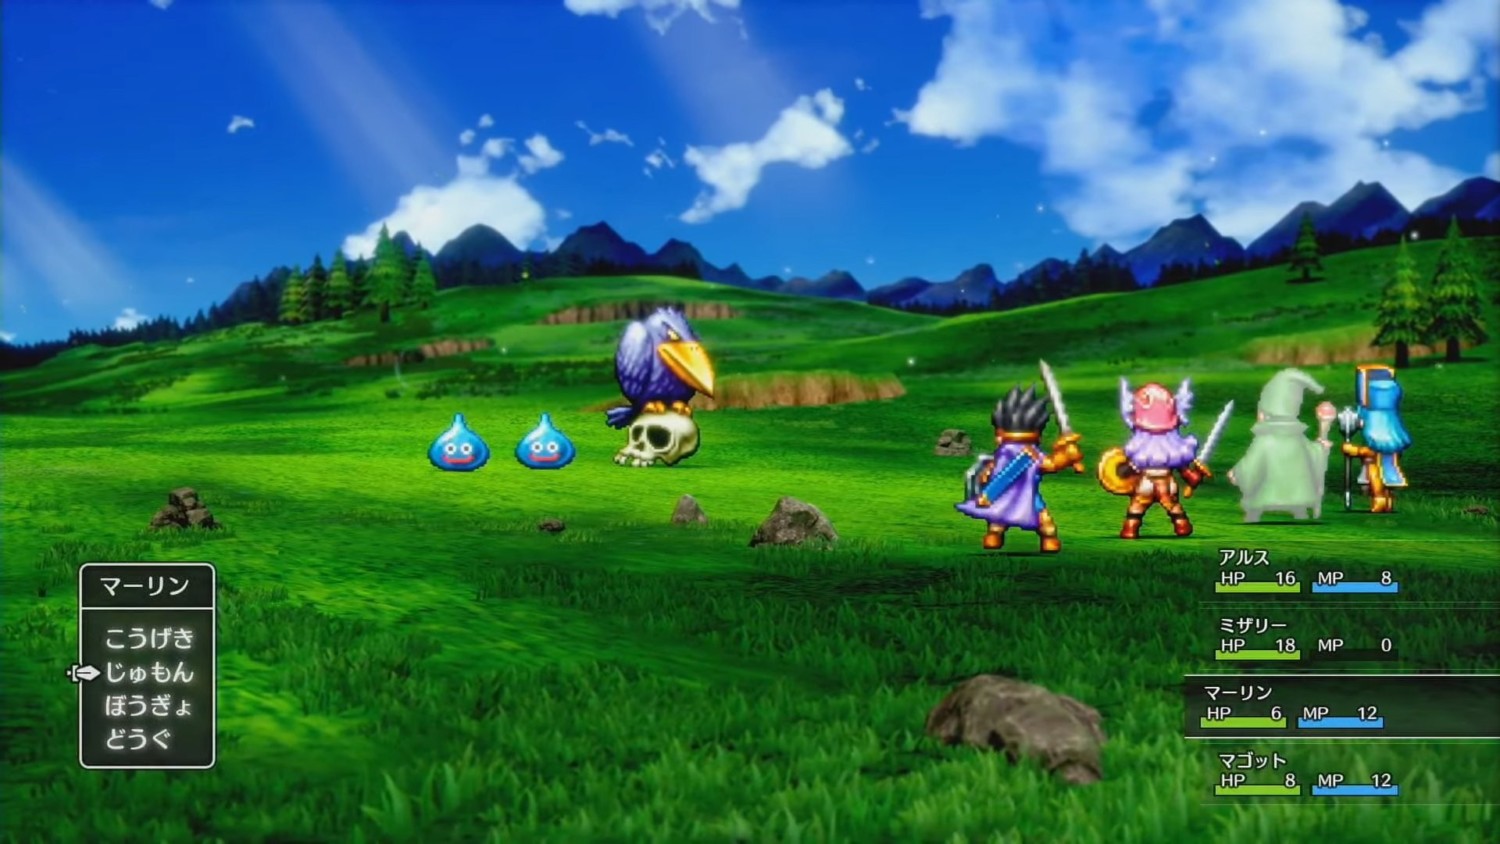 Dragon Quest XII: The Flames of Fate announced by Square Enix